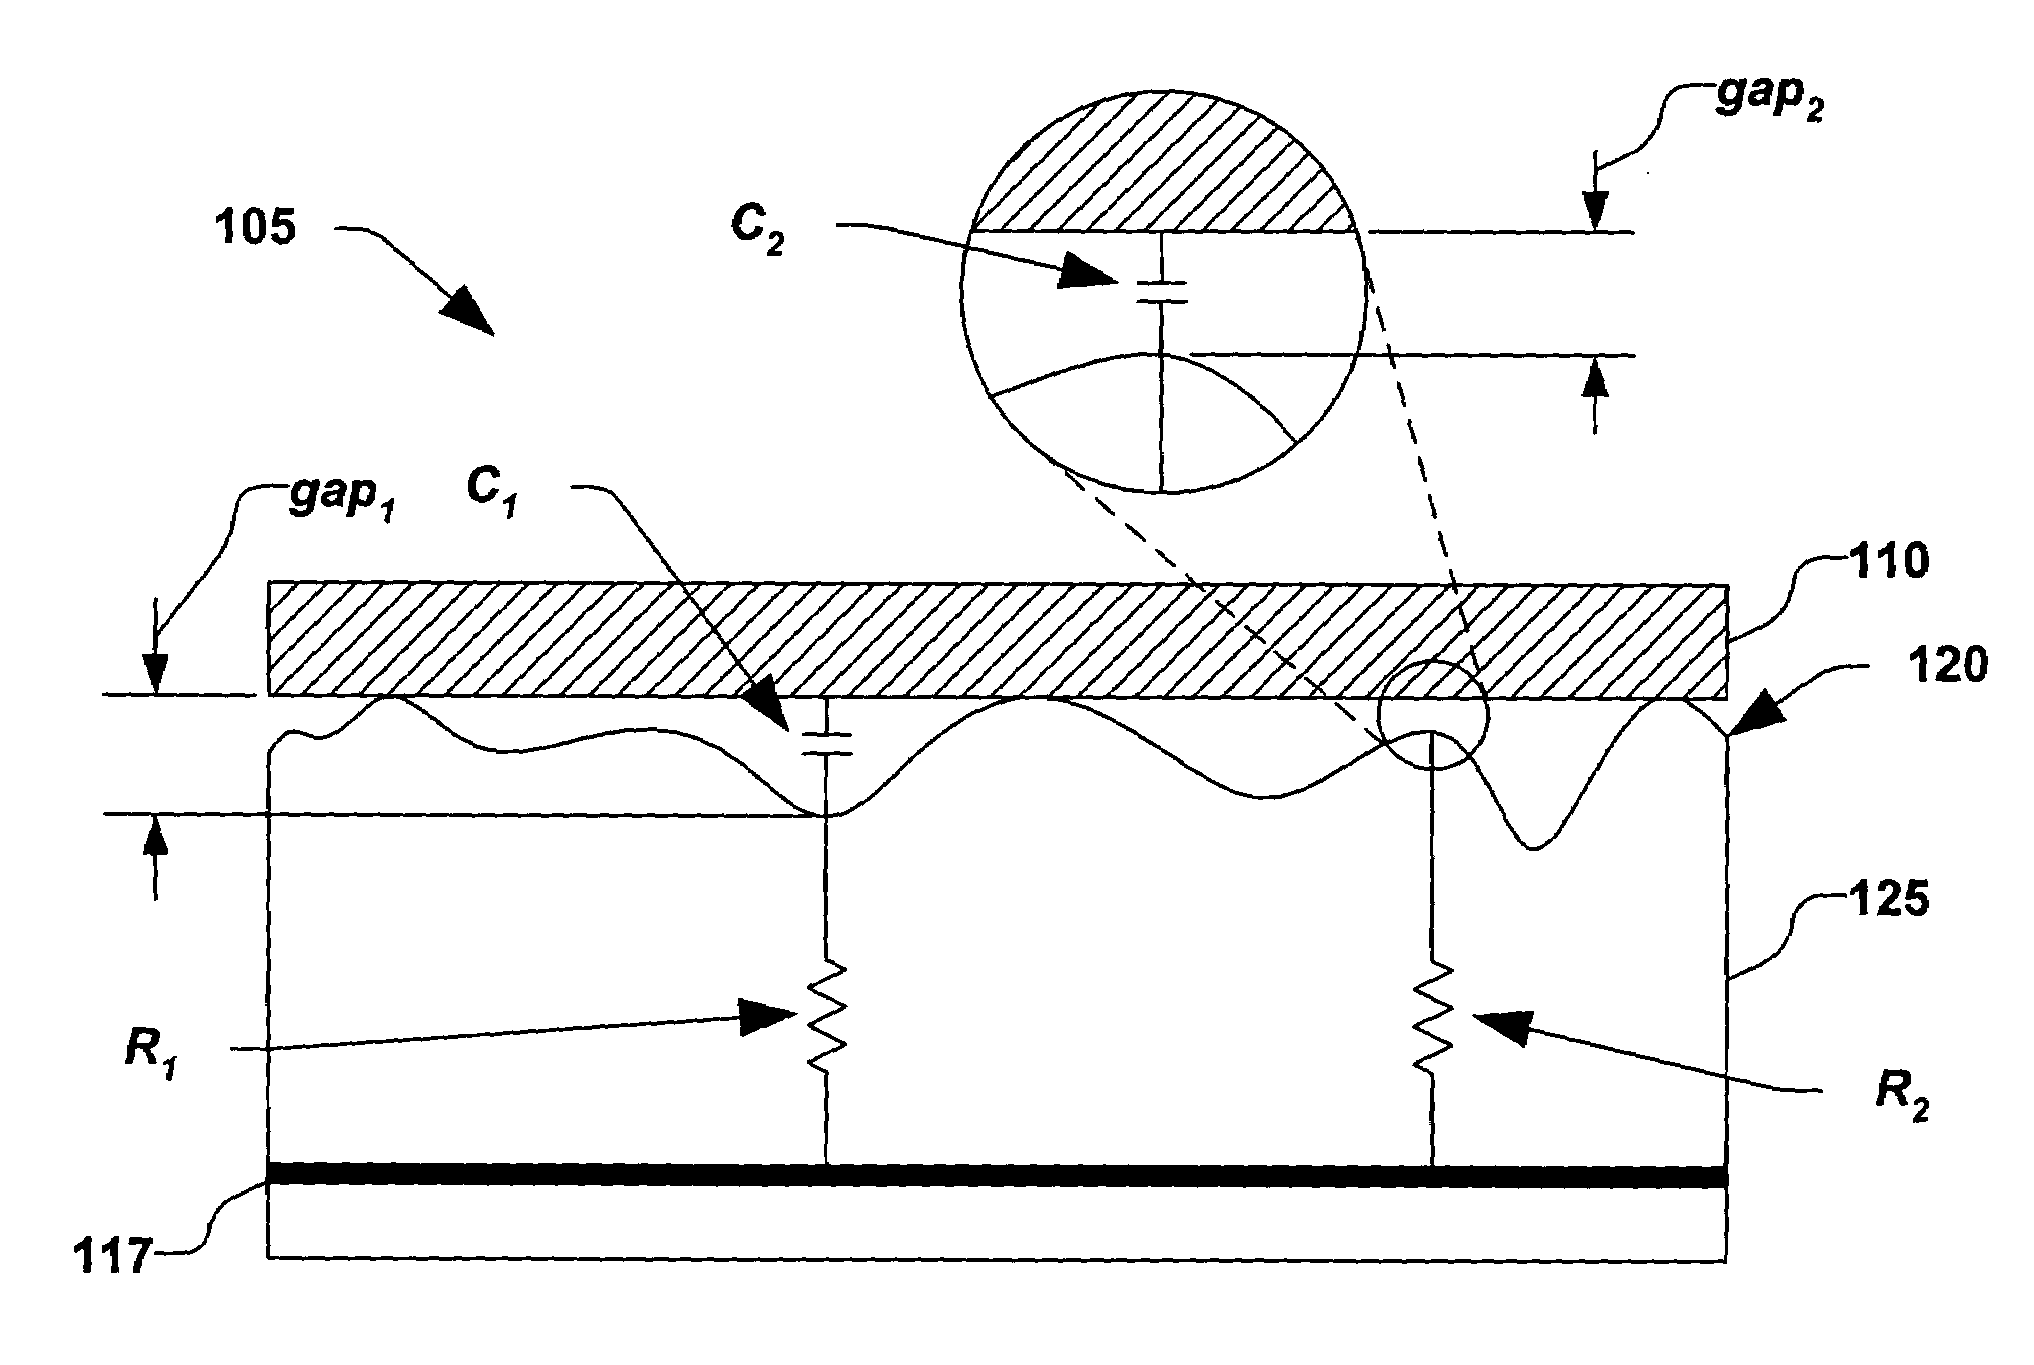 Clamping and de-clamping semiconductor wafers on a J-R electrostatic chuck having a micromachined surface by using force delay in applying a single-phase square wave AC clamping voltage